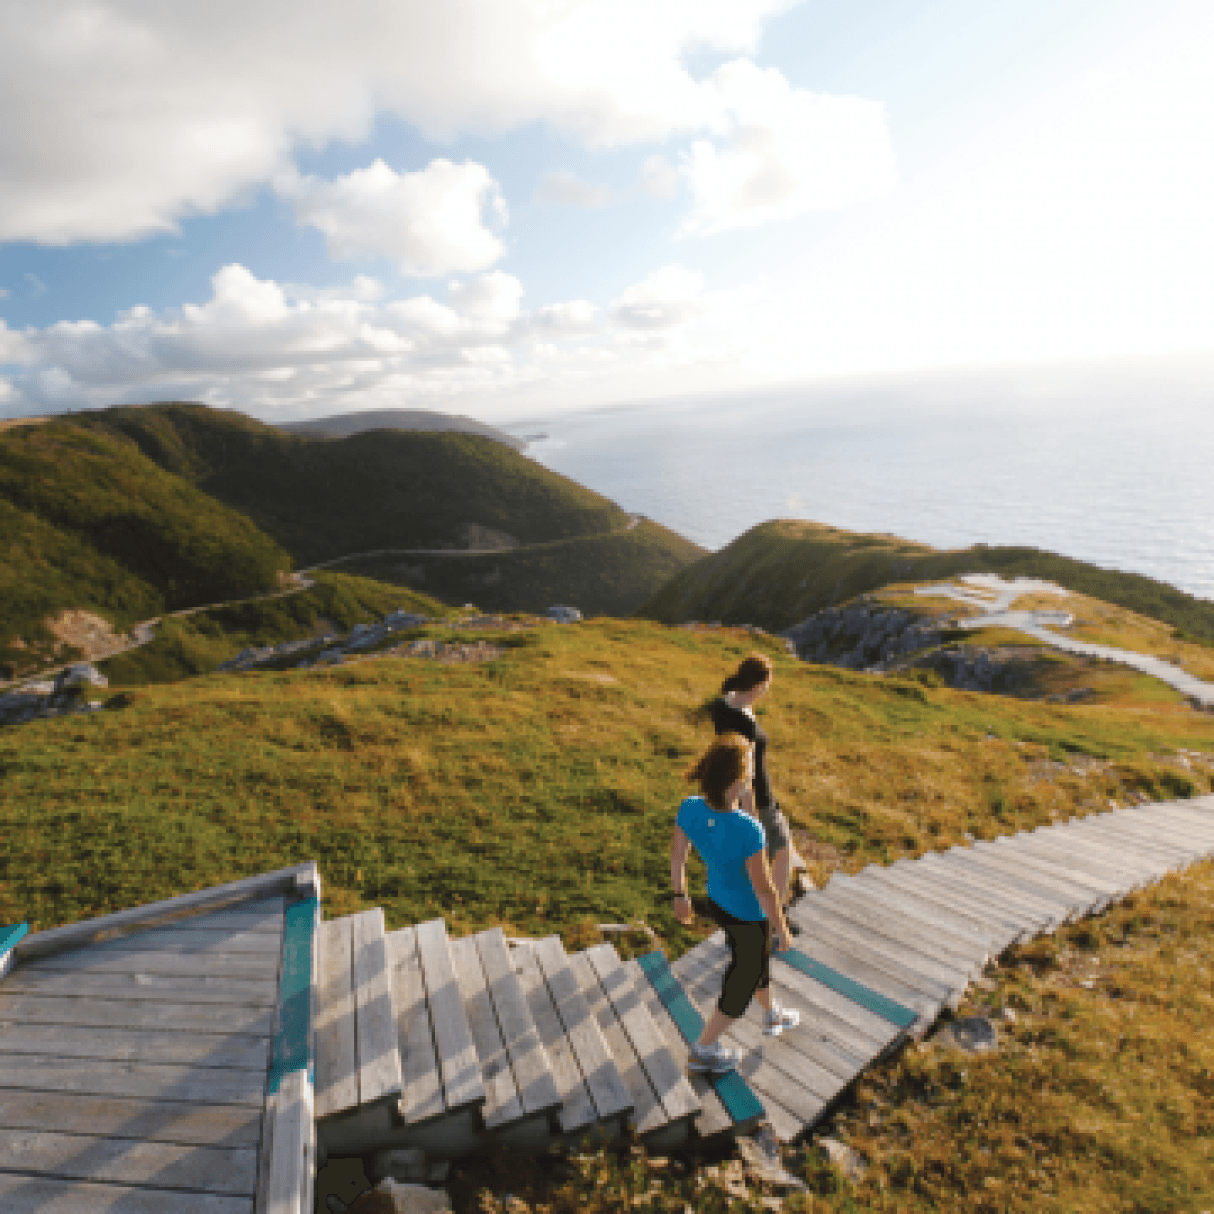 Two people descending the stairs at a vista in Cape Breton Highlands Park